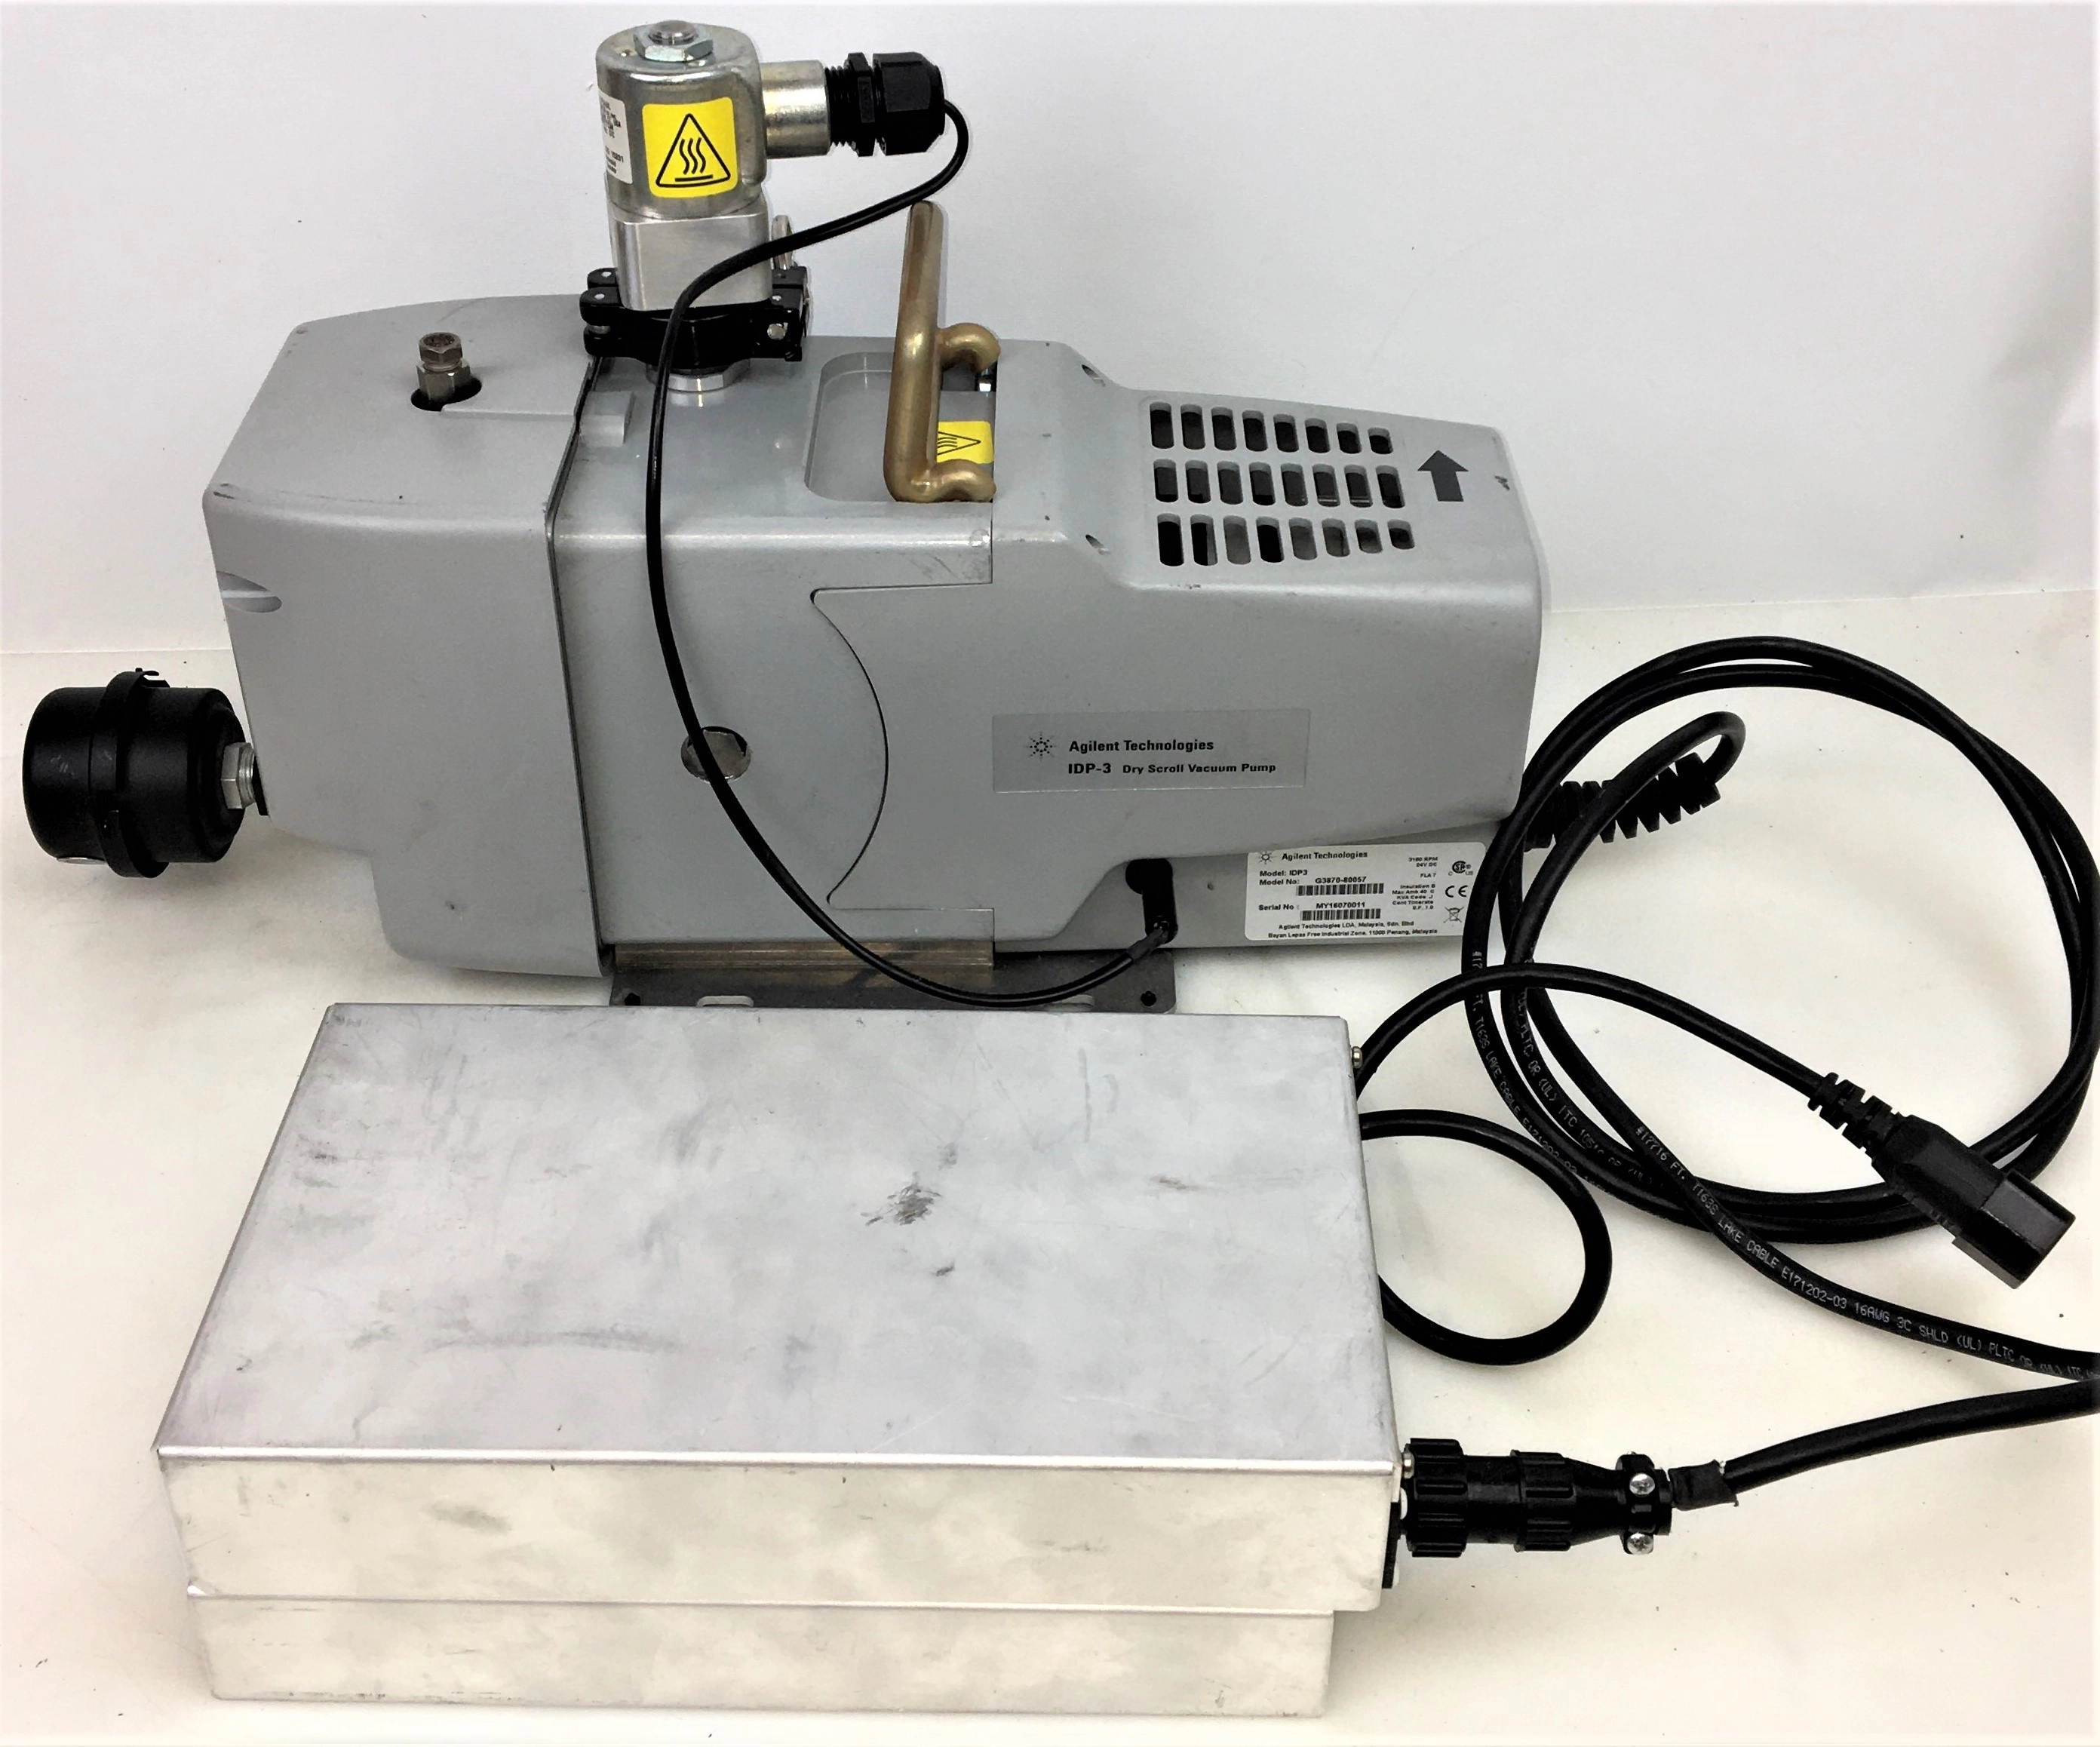 Agilent IDP-3 Dry Scroll Vacuum Pump with Intake Valve and Power